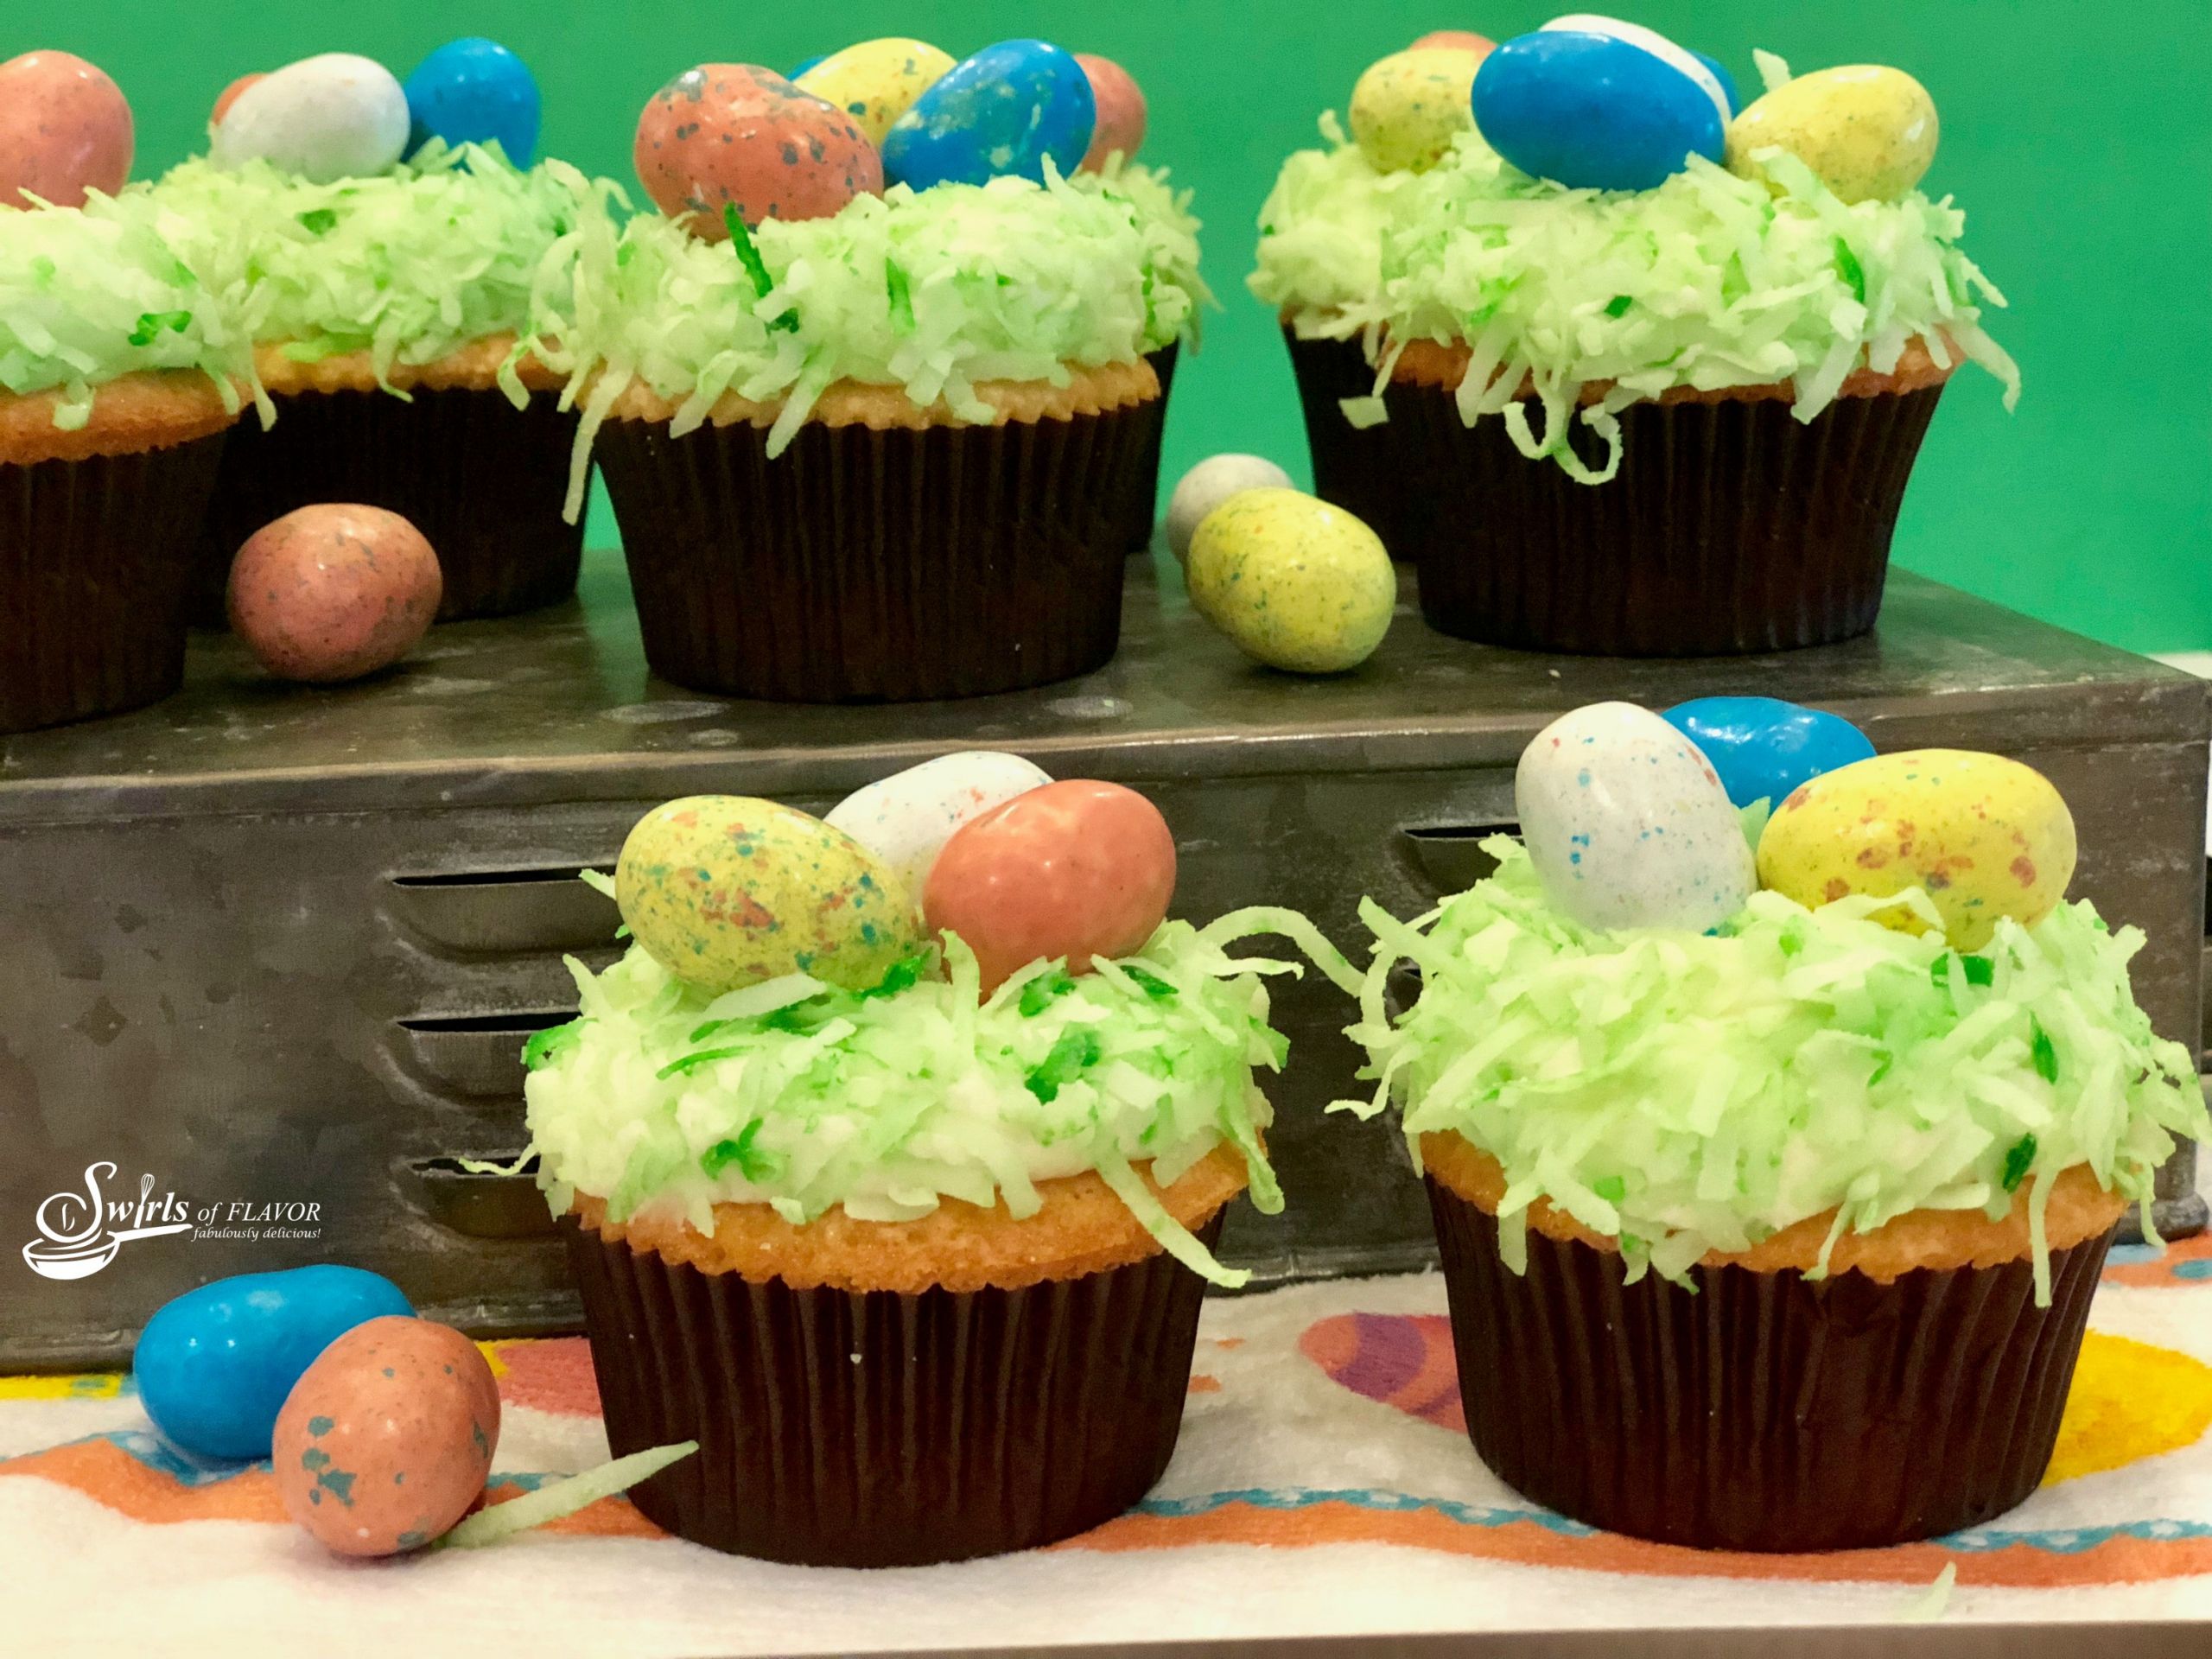 Cupcakes For Easter
 Easter Egg Coconut Cupcakes Swirls of Flavor